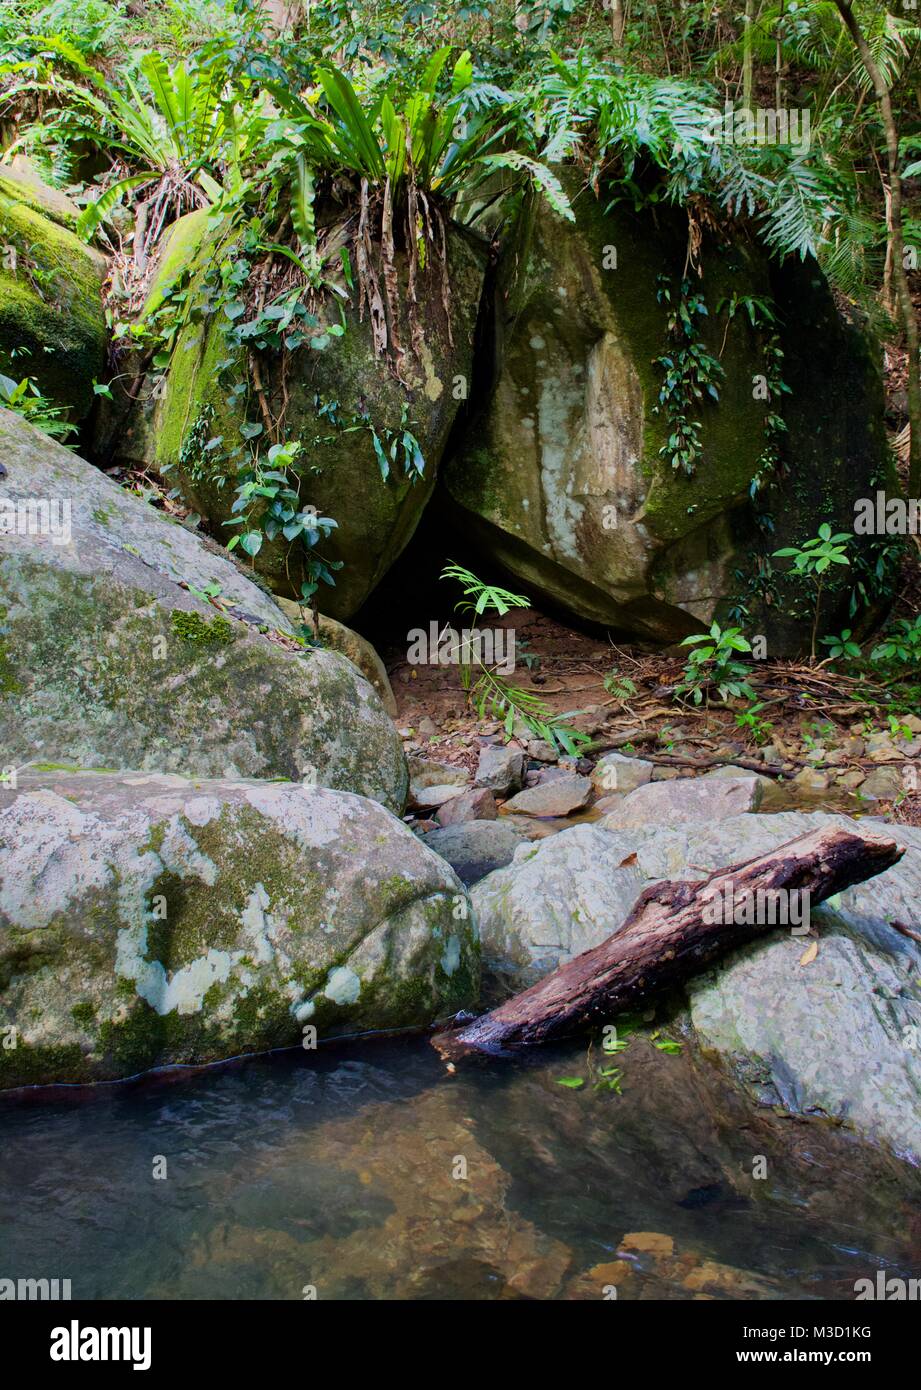 Split Rock in the Australian Rainforest with large boulders and a water hole Stock Photo